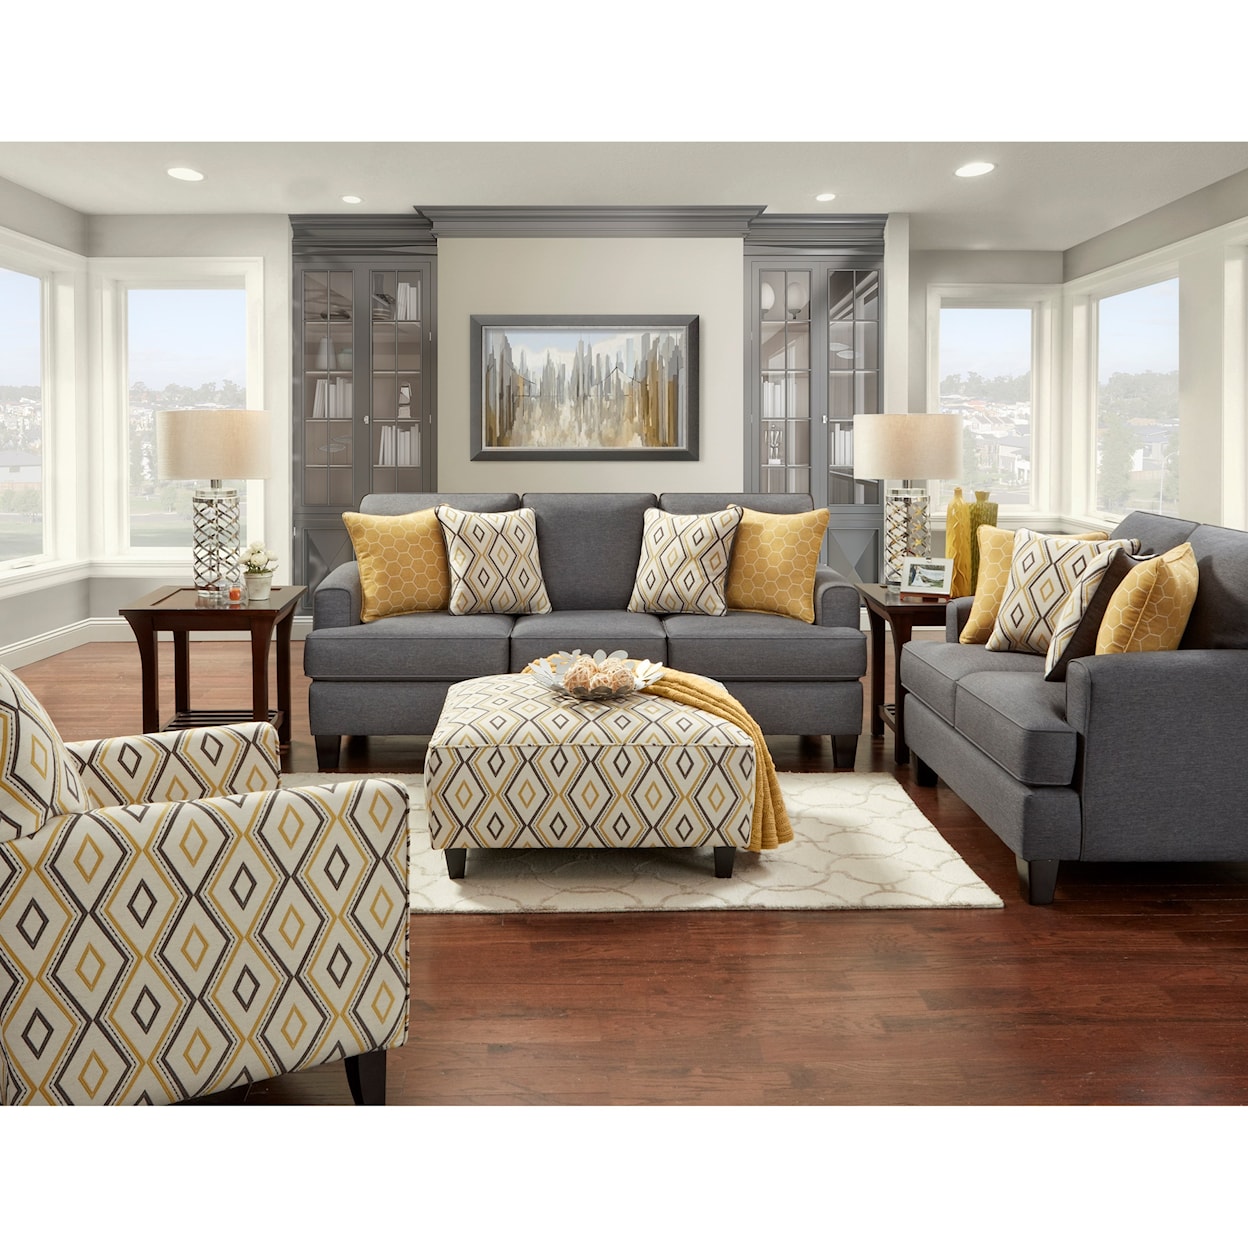 Fusion Furniture 2600 MAXWELL GRAY DIJON GROUP Accent Chair